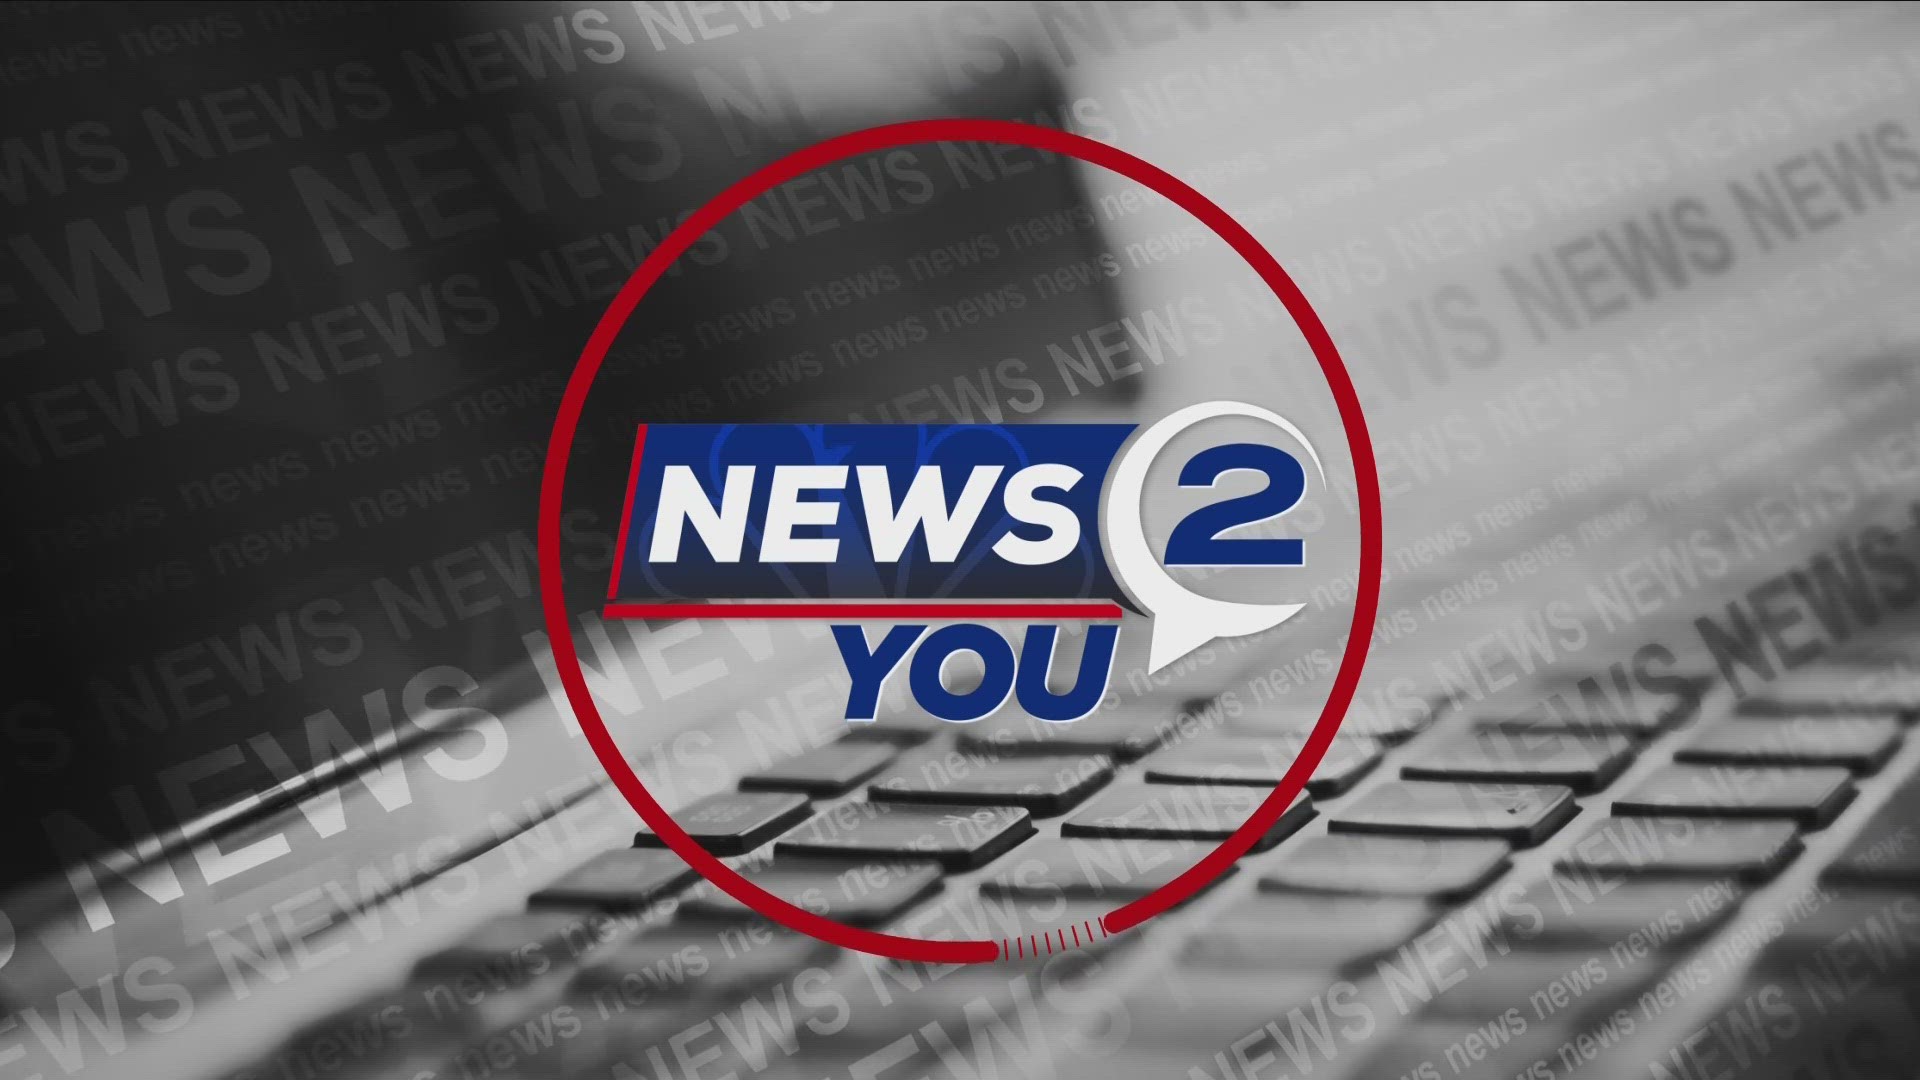 Dave McKinley has more in our weekly walk back through time in News 2 You